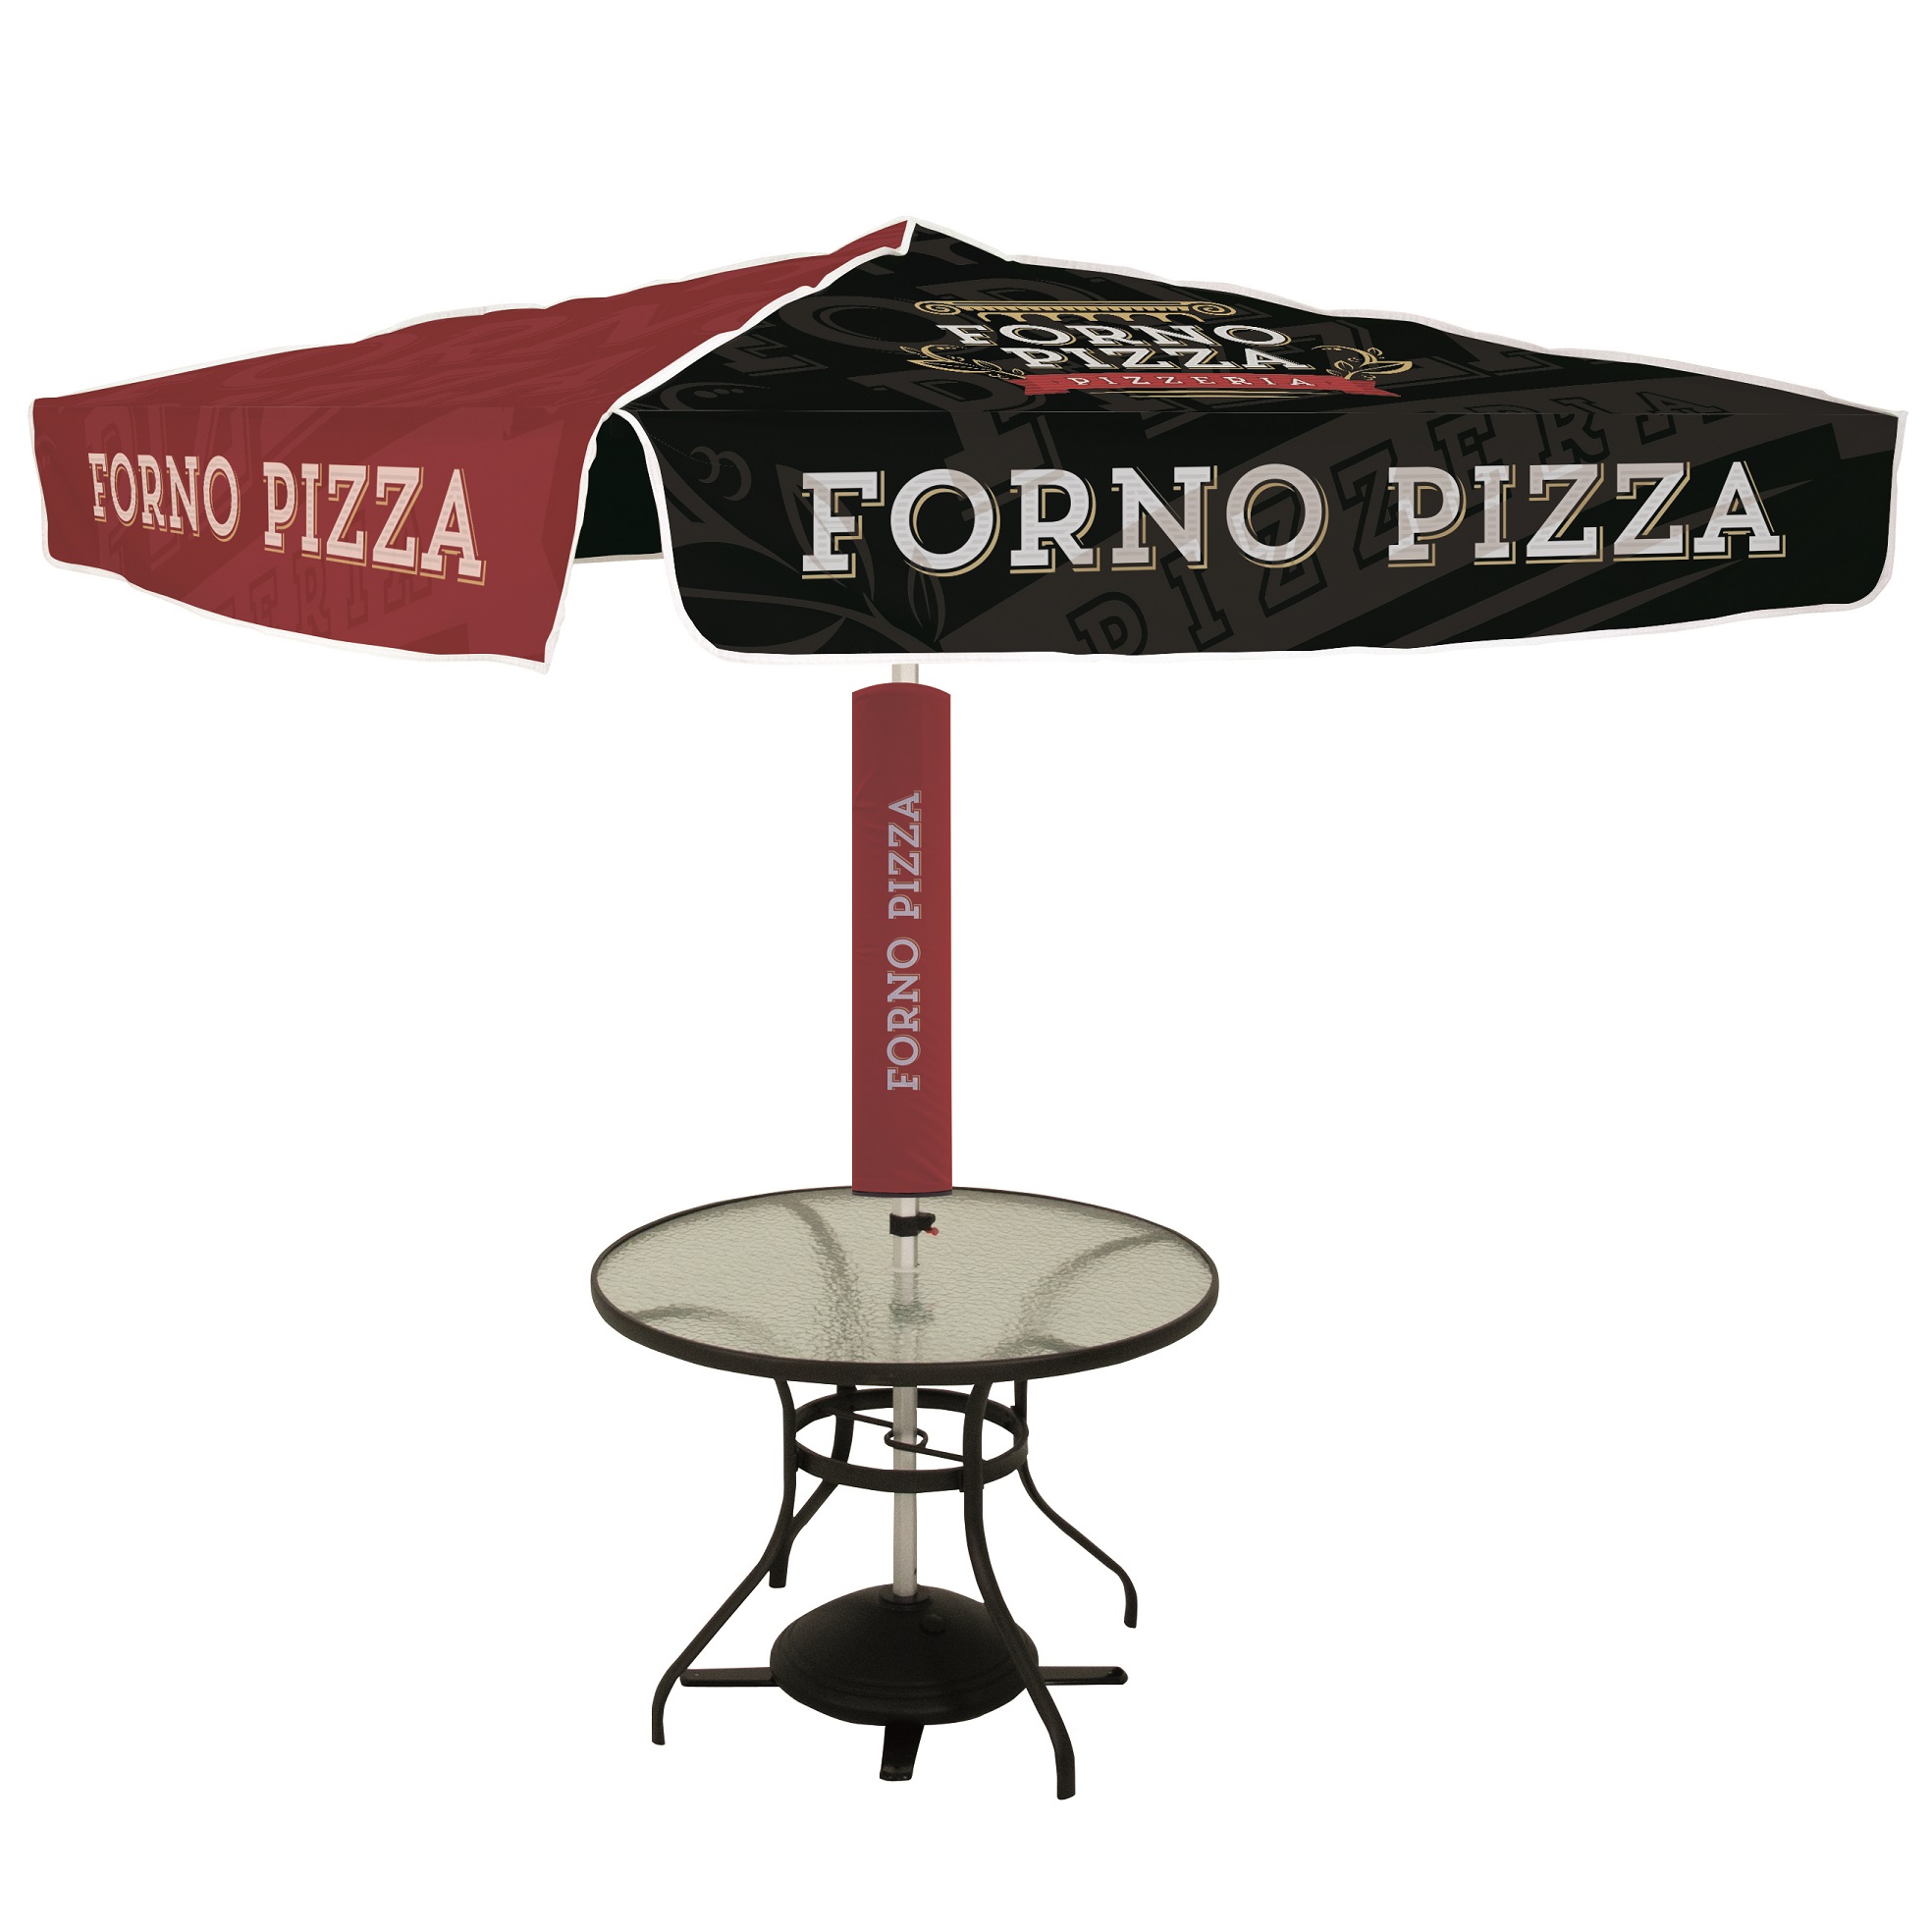 circular glass table with red and black Forno Pizza patio umbrella in the middle